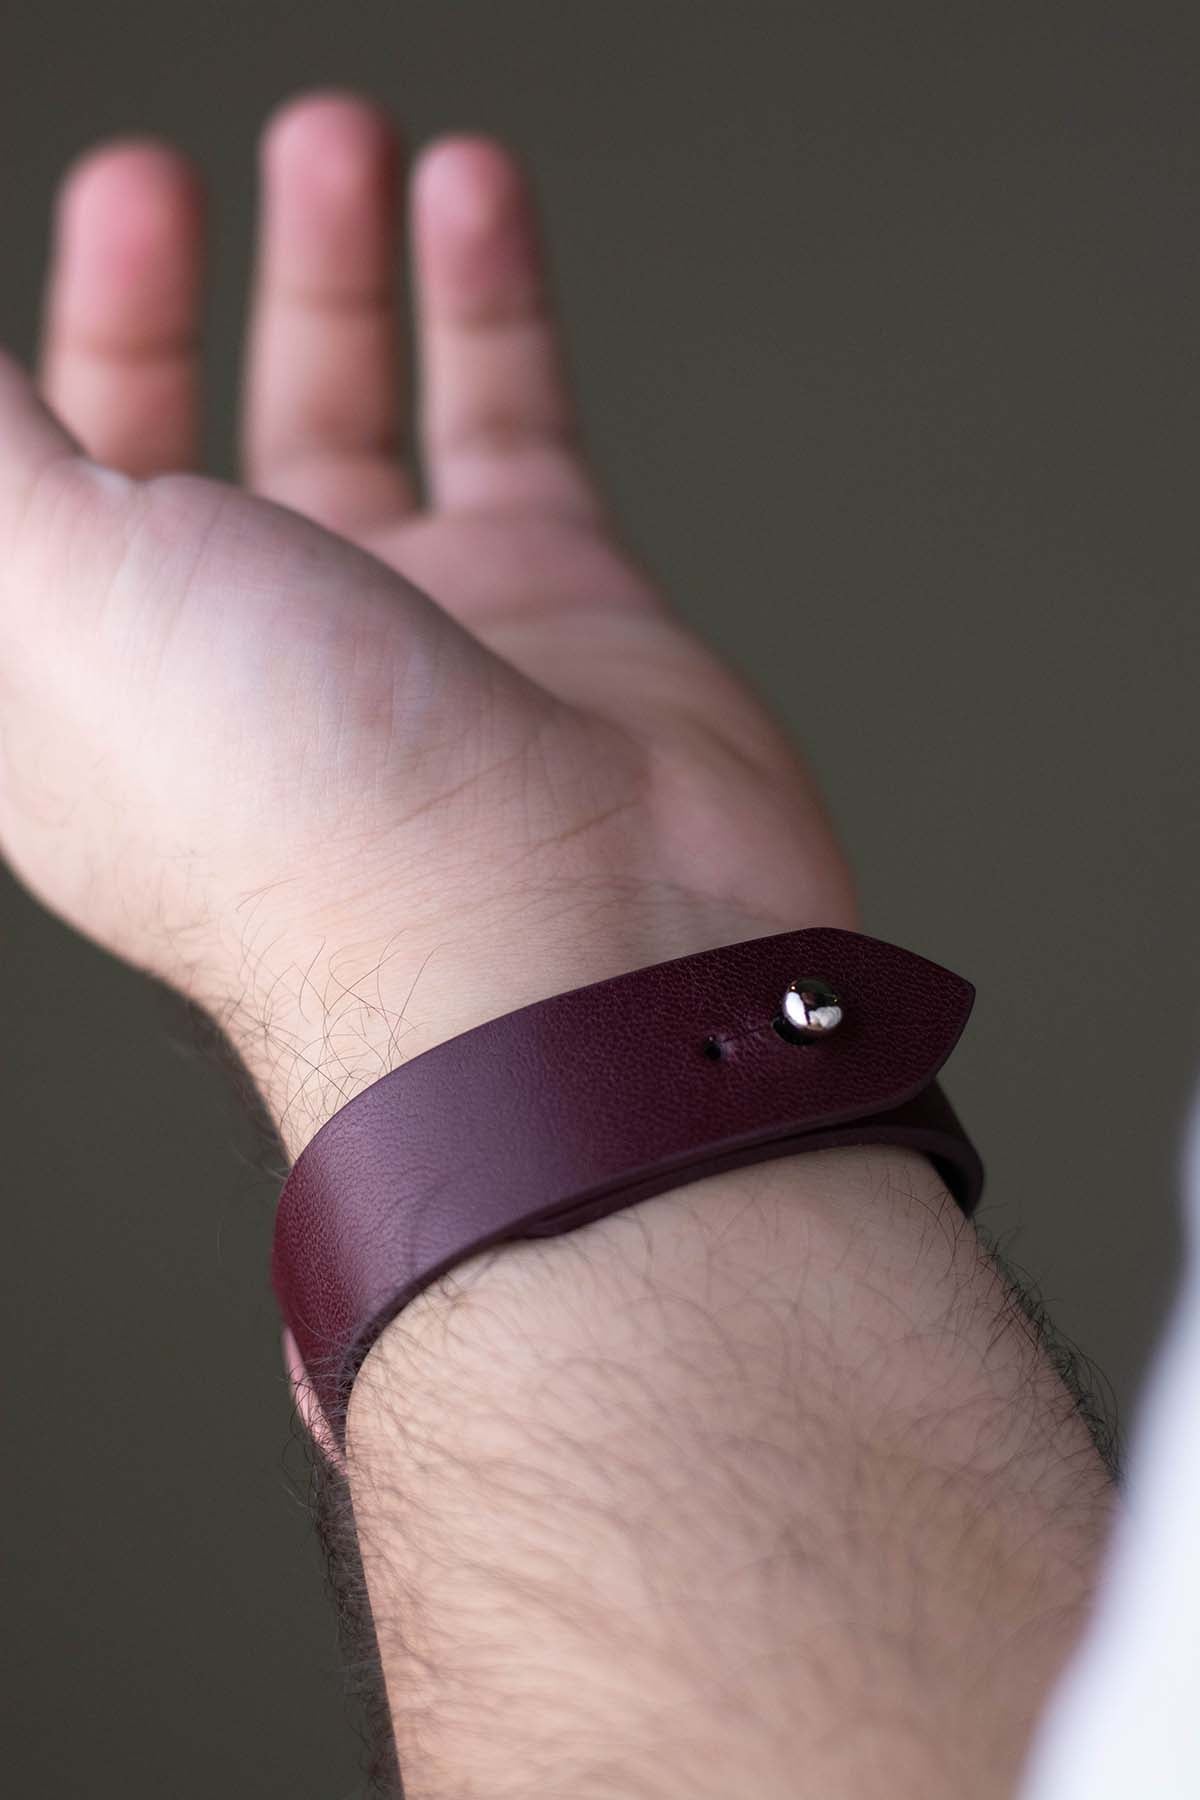 Burgundy Leather Watch Strap  - Quick Release Pins - The Hermoso